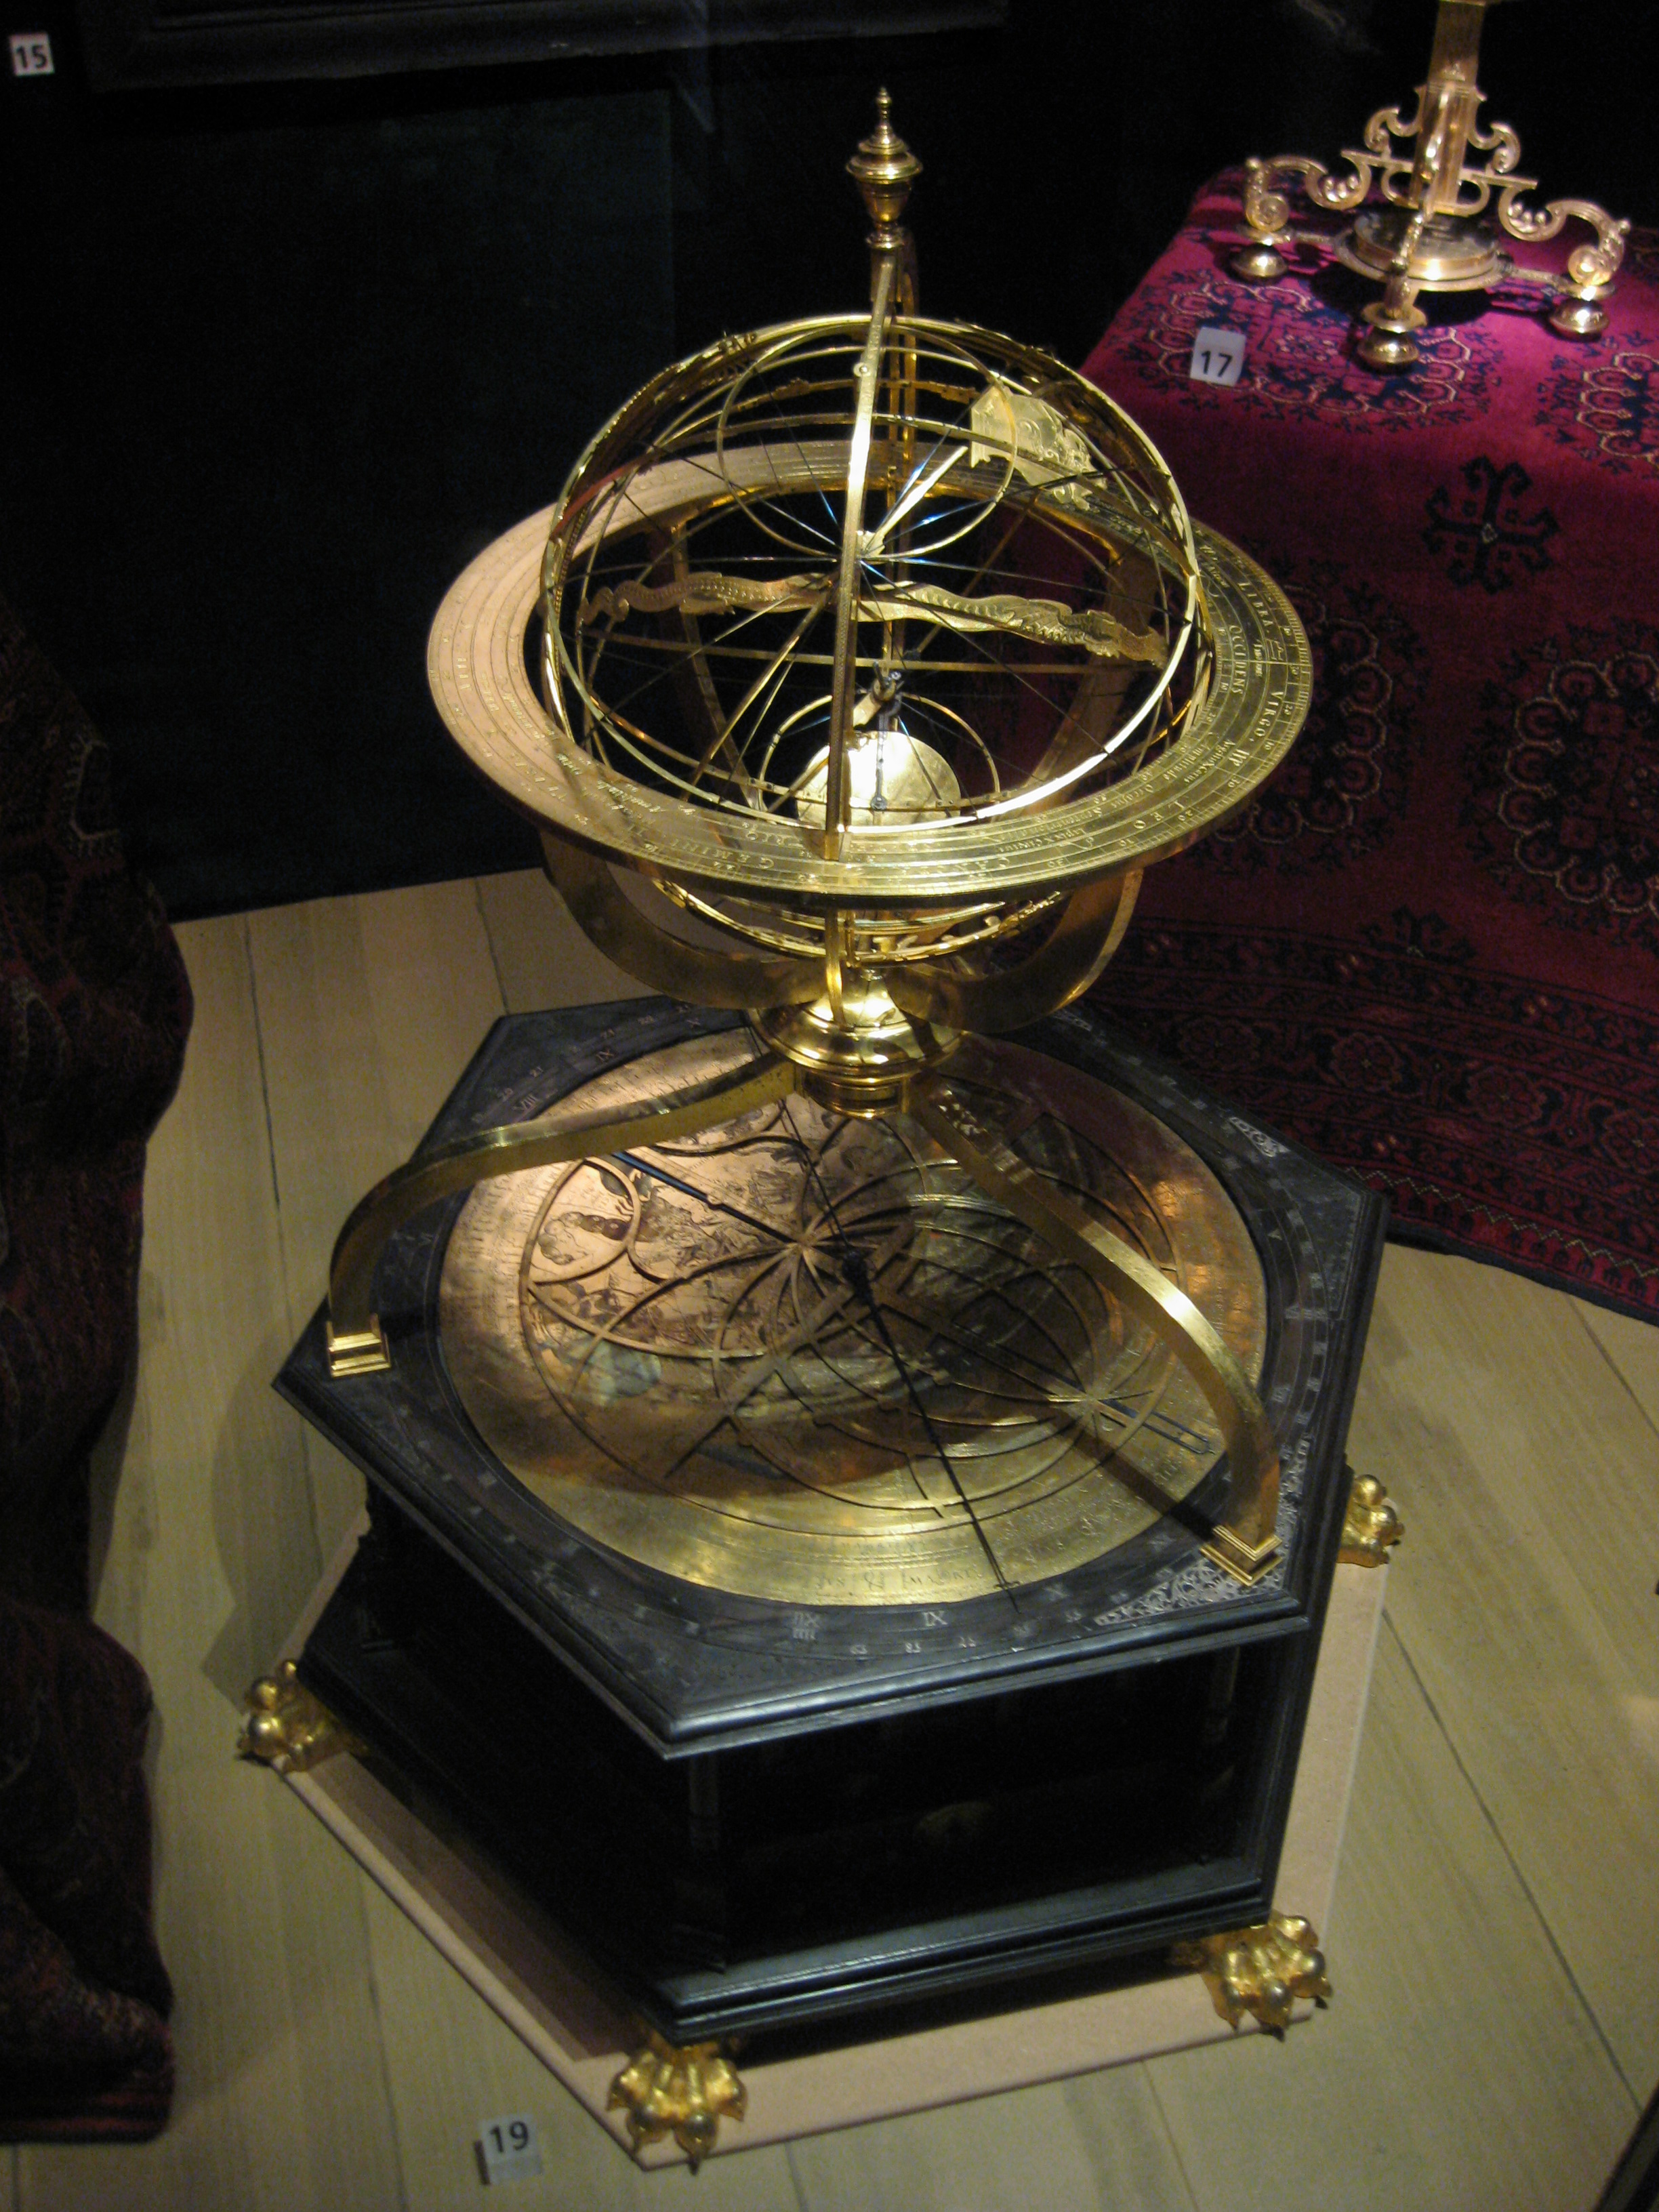 upload.wikimedia.org_wikipedia_commons_e_e4_armillary_sphere_with_astronomical_clock.jpg